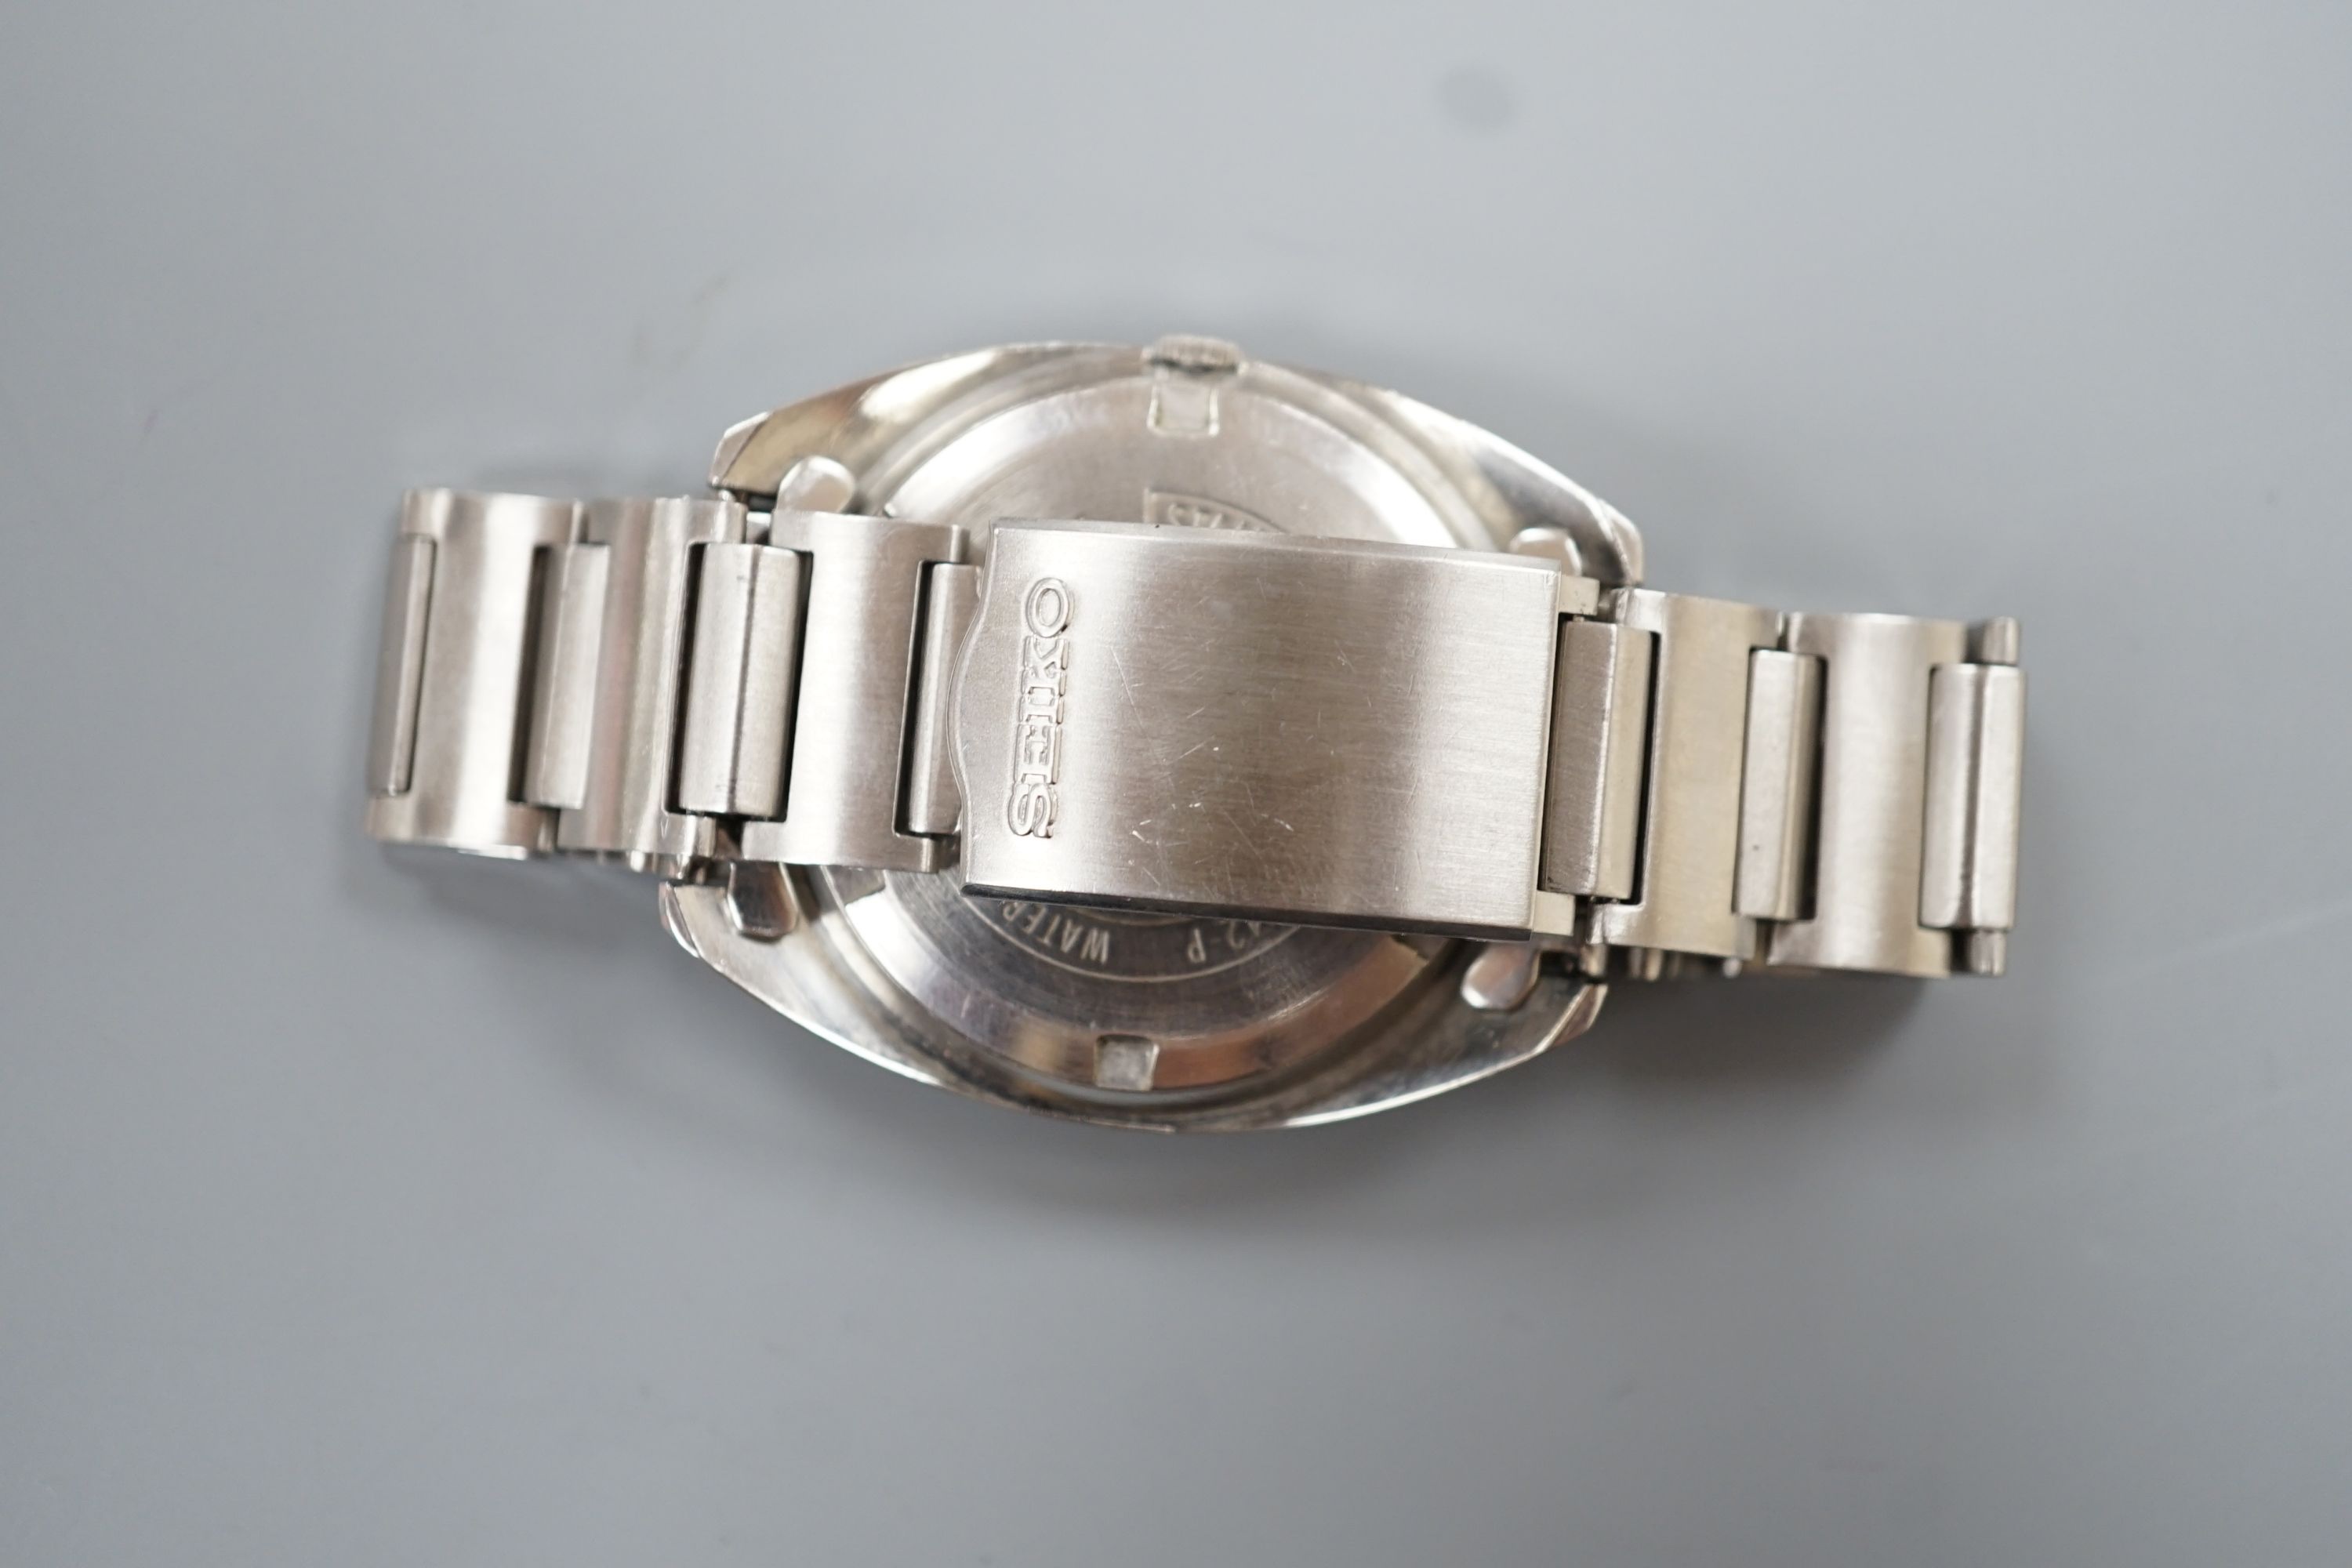 A gentleman's 1970's stainless steel Seiko automatic wrist watch, no box or papers.